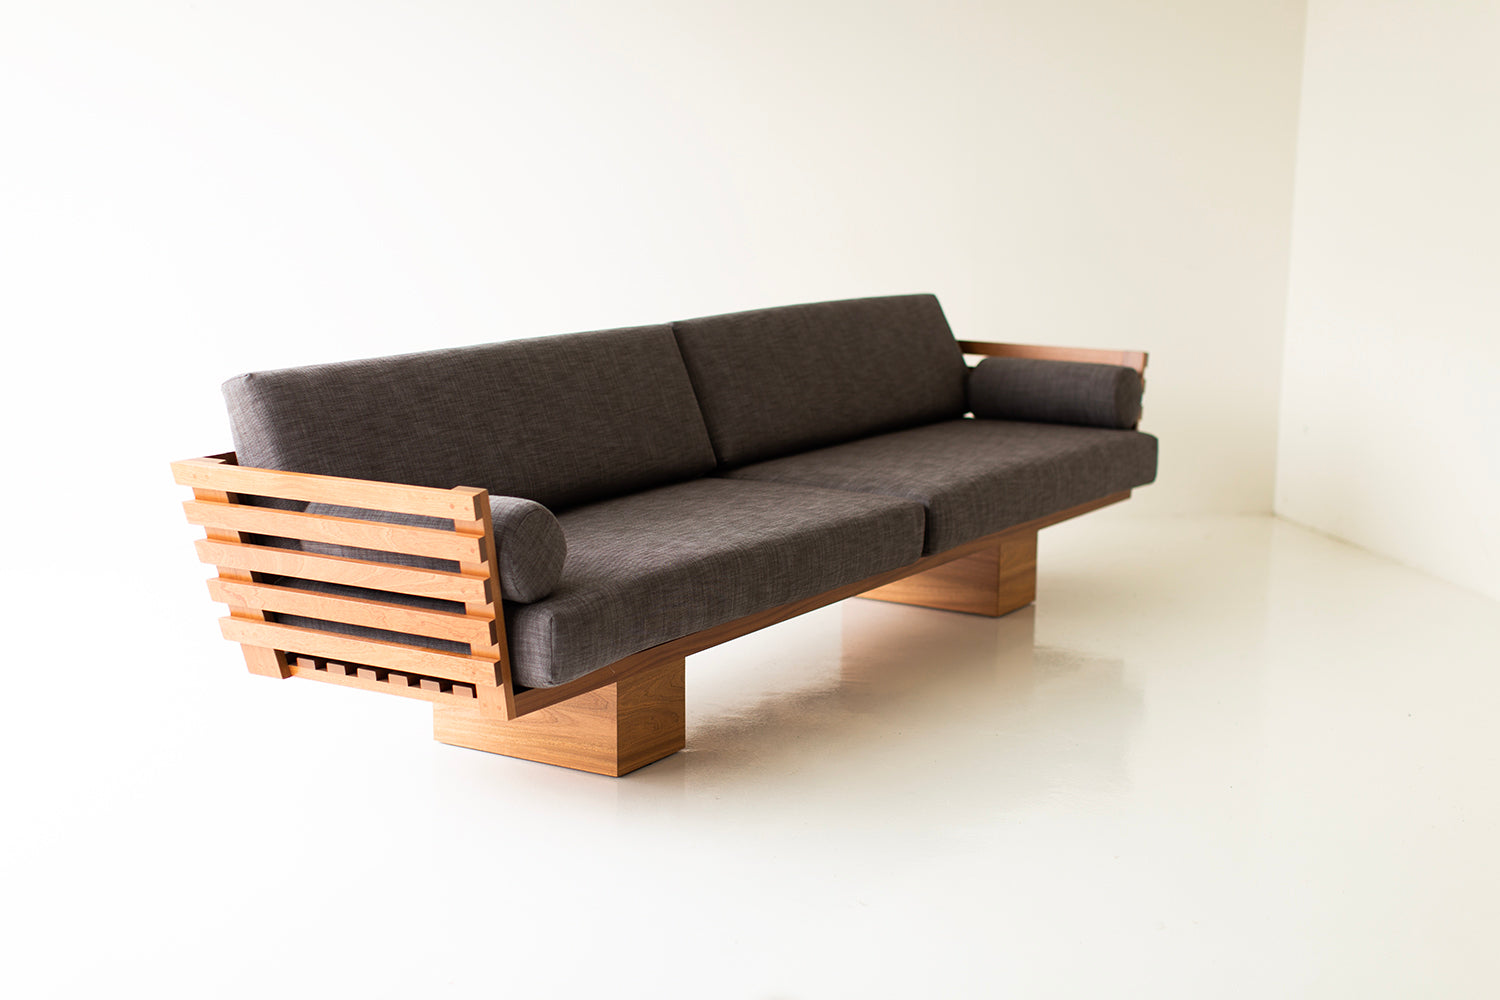 Large-Outdoor-Slatted-Suelo-Sofa-03